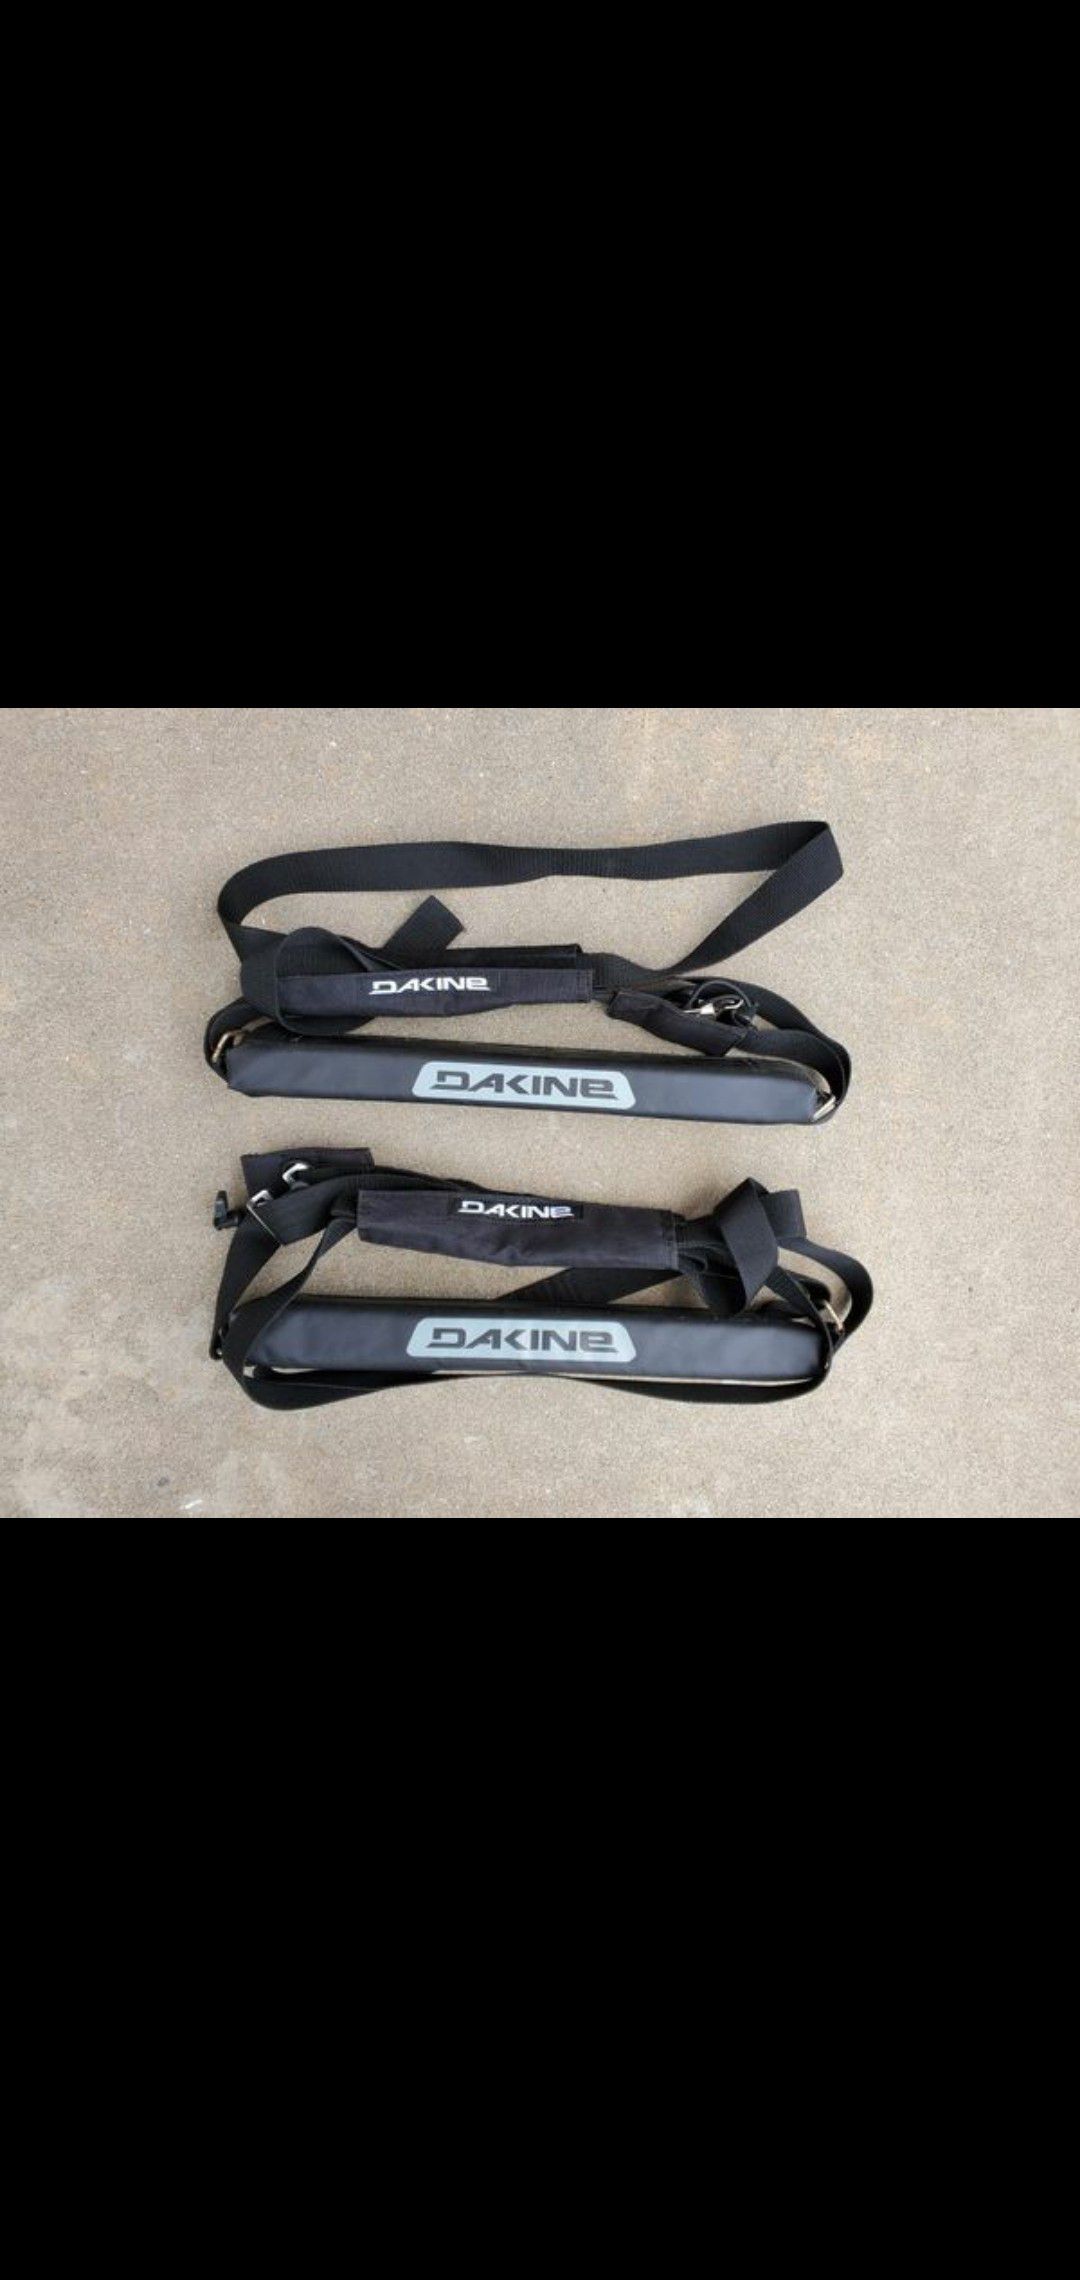 Dakine Premium Surfboard Roof Pads & Straps for Cars or SUVs w/o roof racks